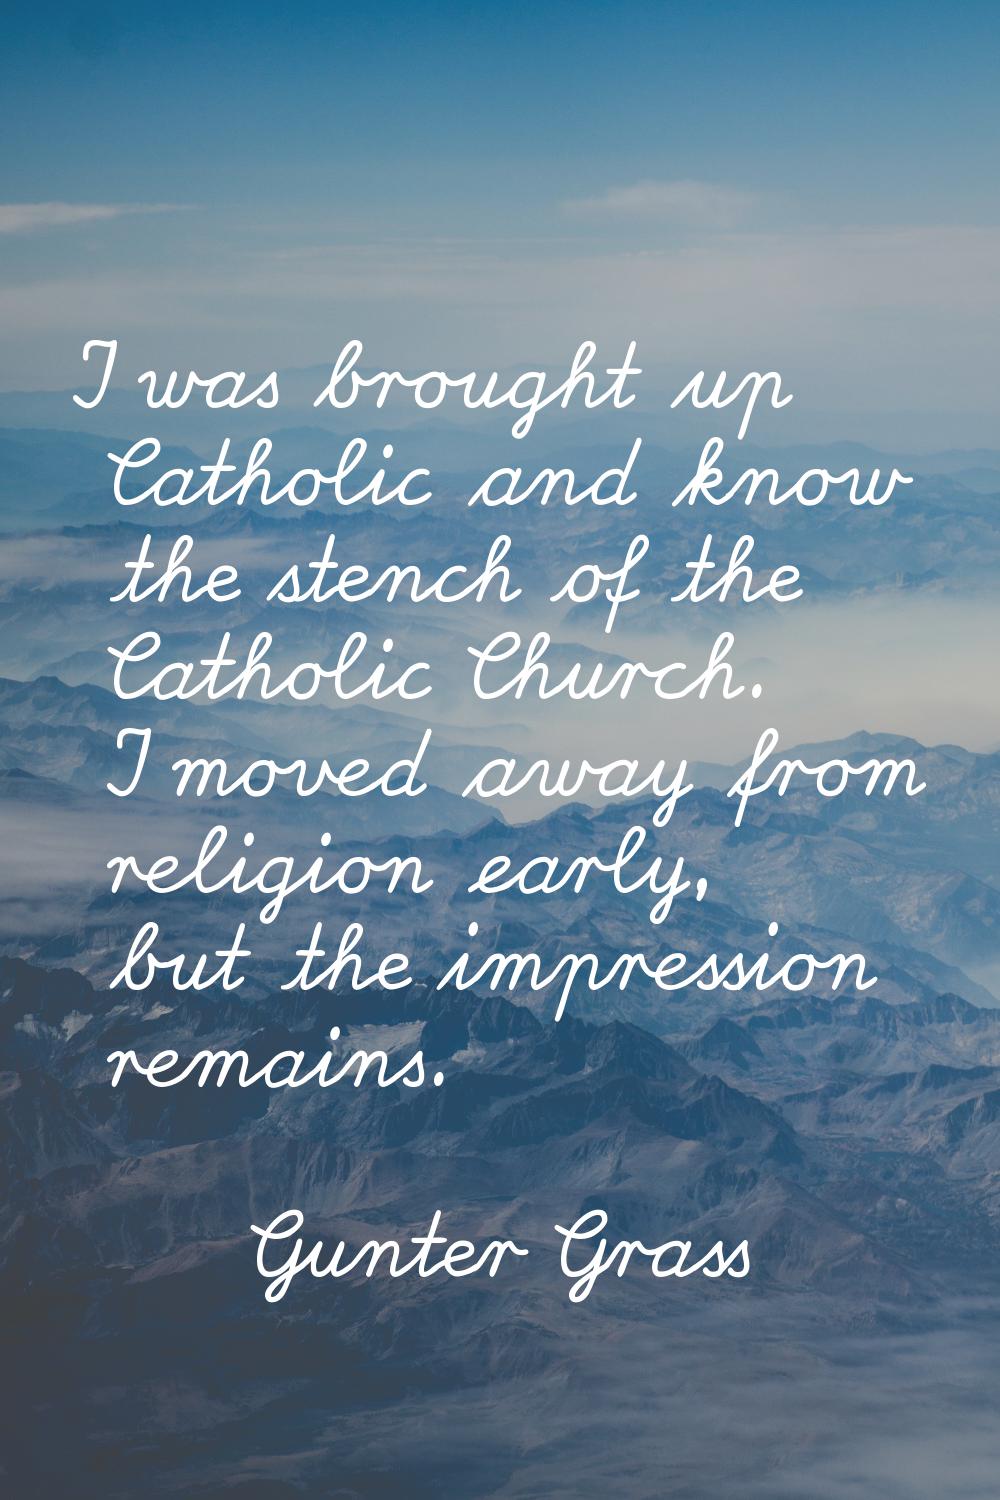 I was brought up Catholic and know the stench of the Catholic Church. I moved away from religion ea